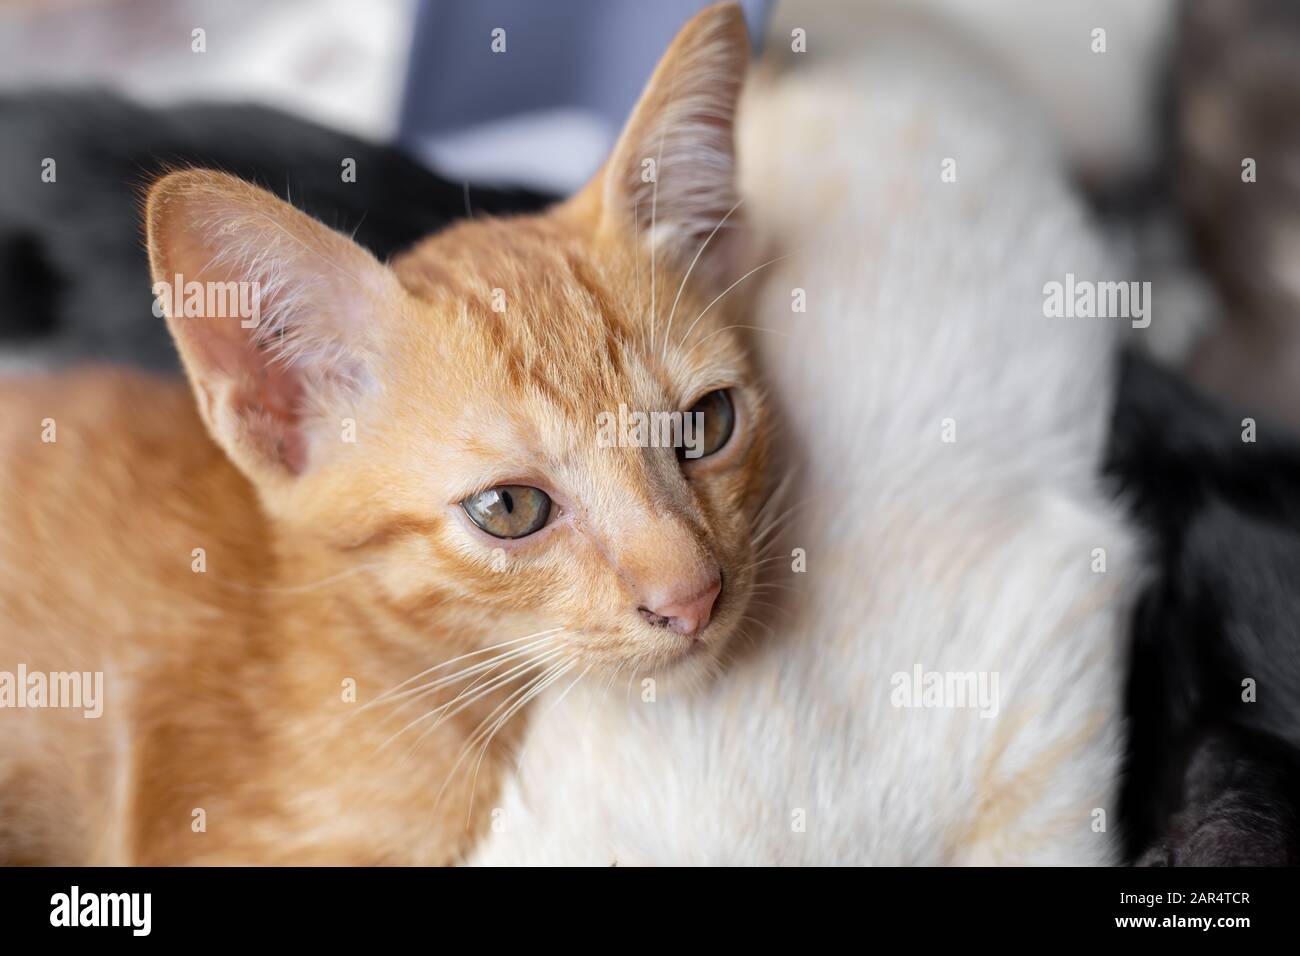 Kittens that are sucking milk from the mother cat. Stock Photo